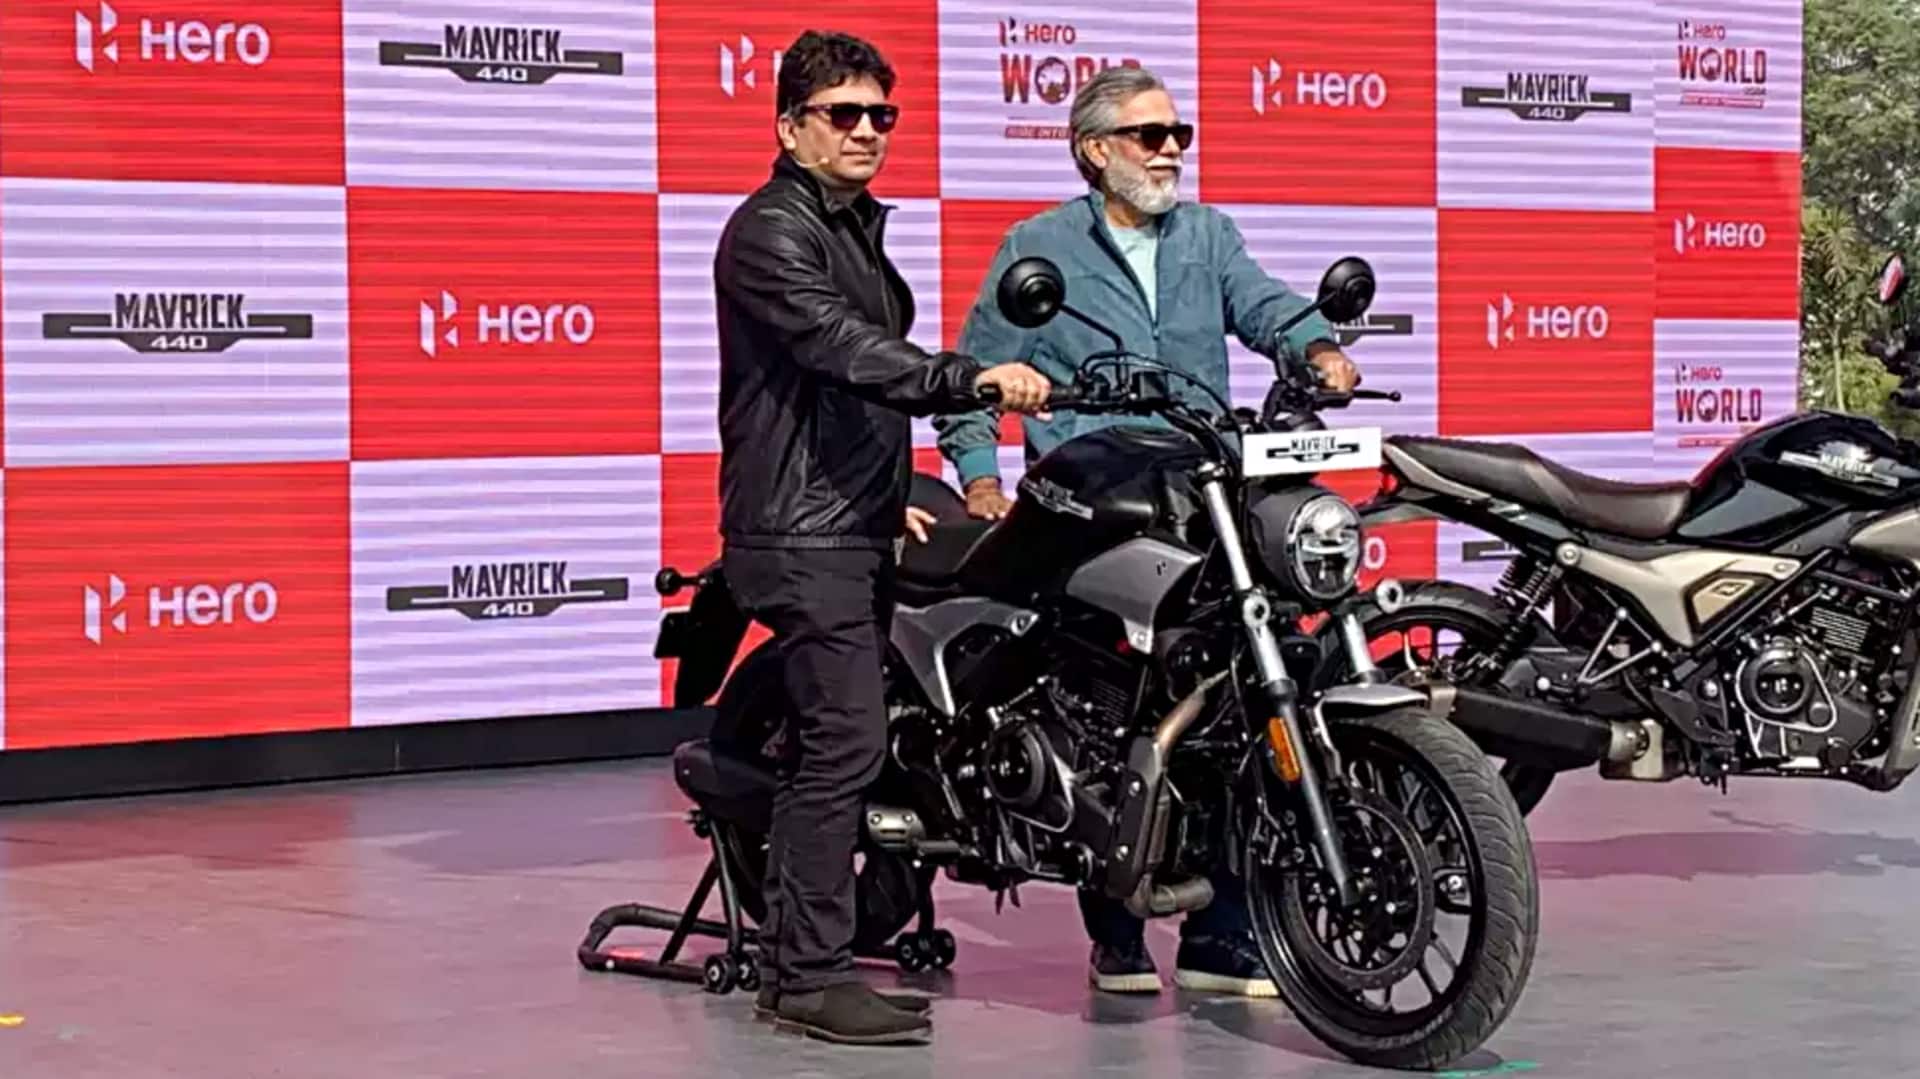 Hero MotoCorp unveils Mavrick 440, bookings to commence in February